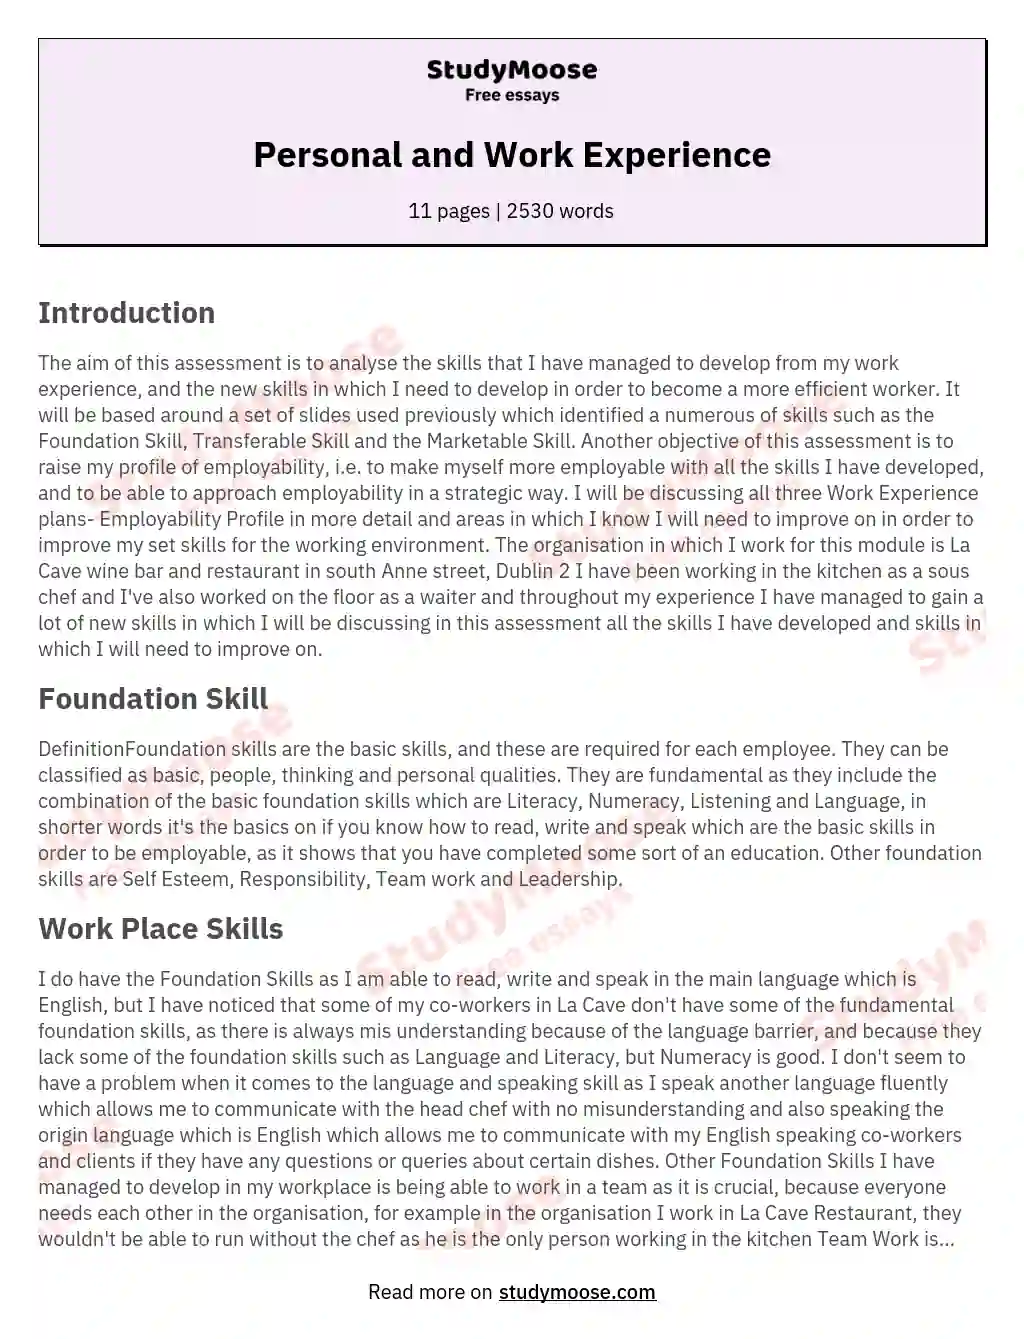 essay about a job experience